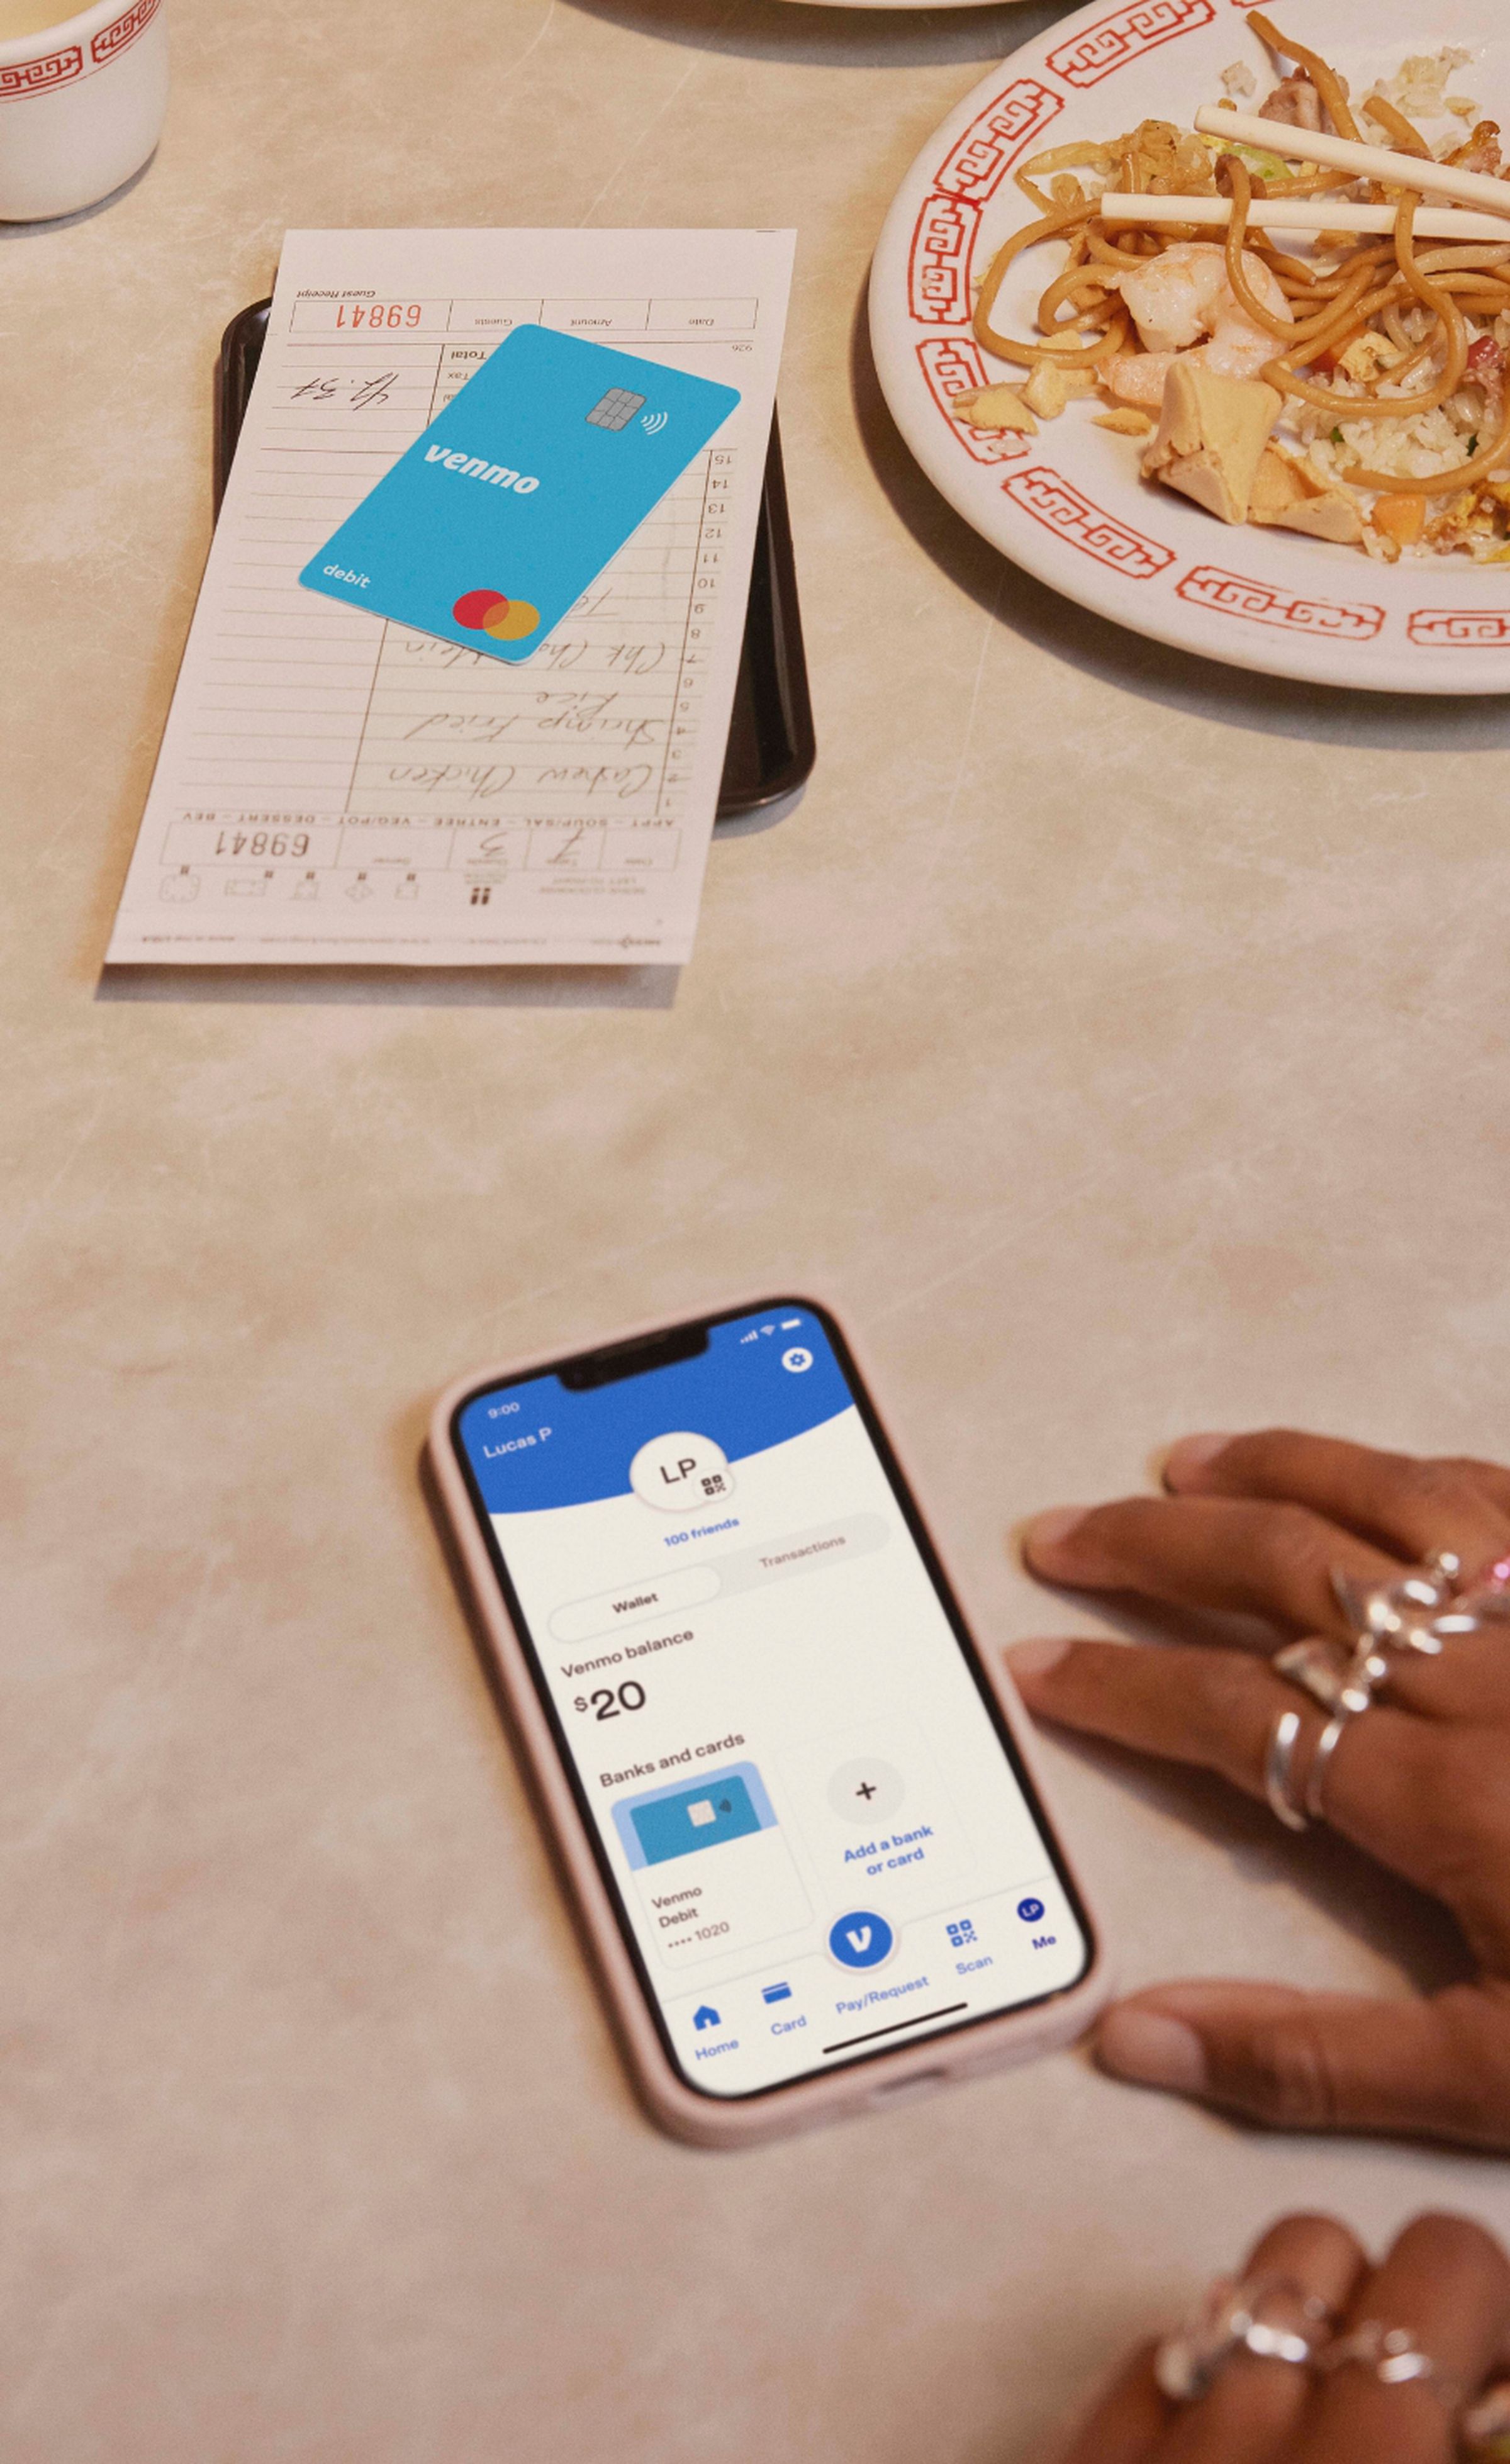 Someone using the Venmo app while ordering food. A Venmo card can be seen on the table.